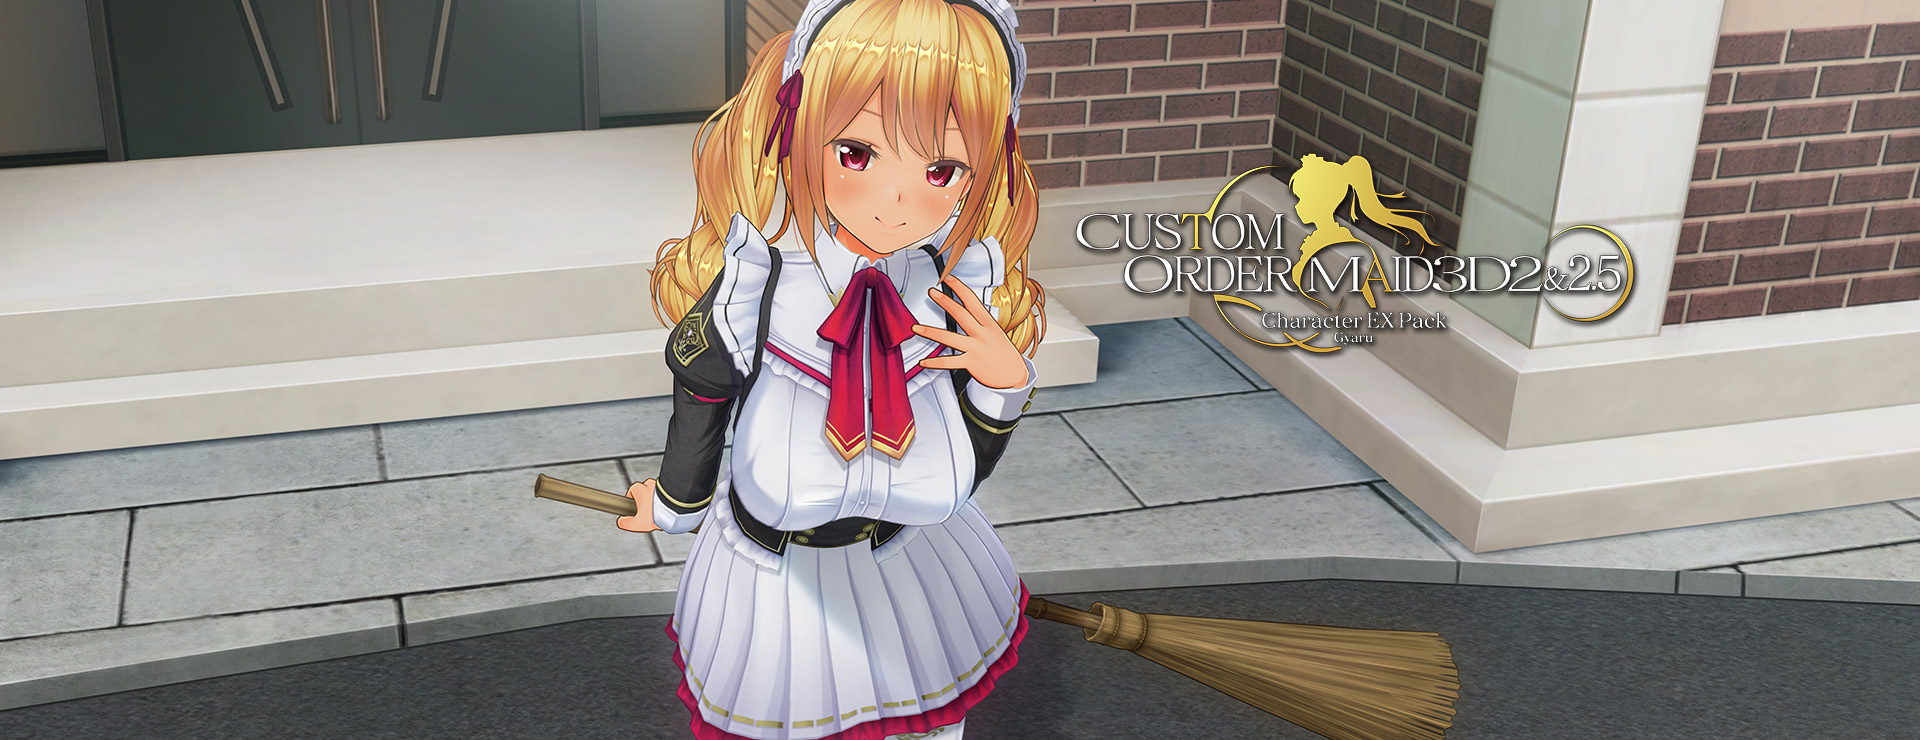 Custom Order Maid 3D 2: Character EX Pack Gyaru High Poly All In One Edition - Symulacja Gra